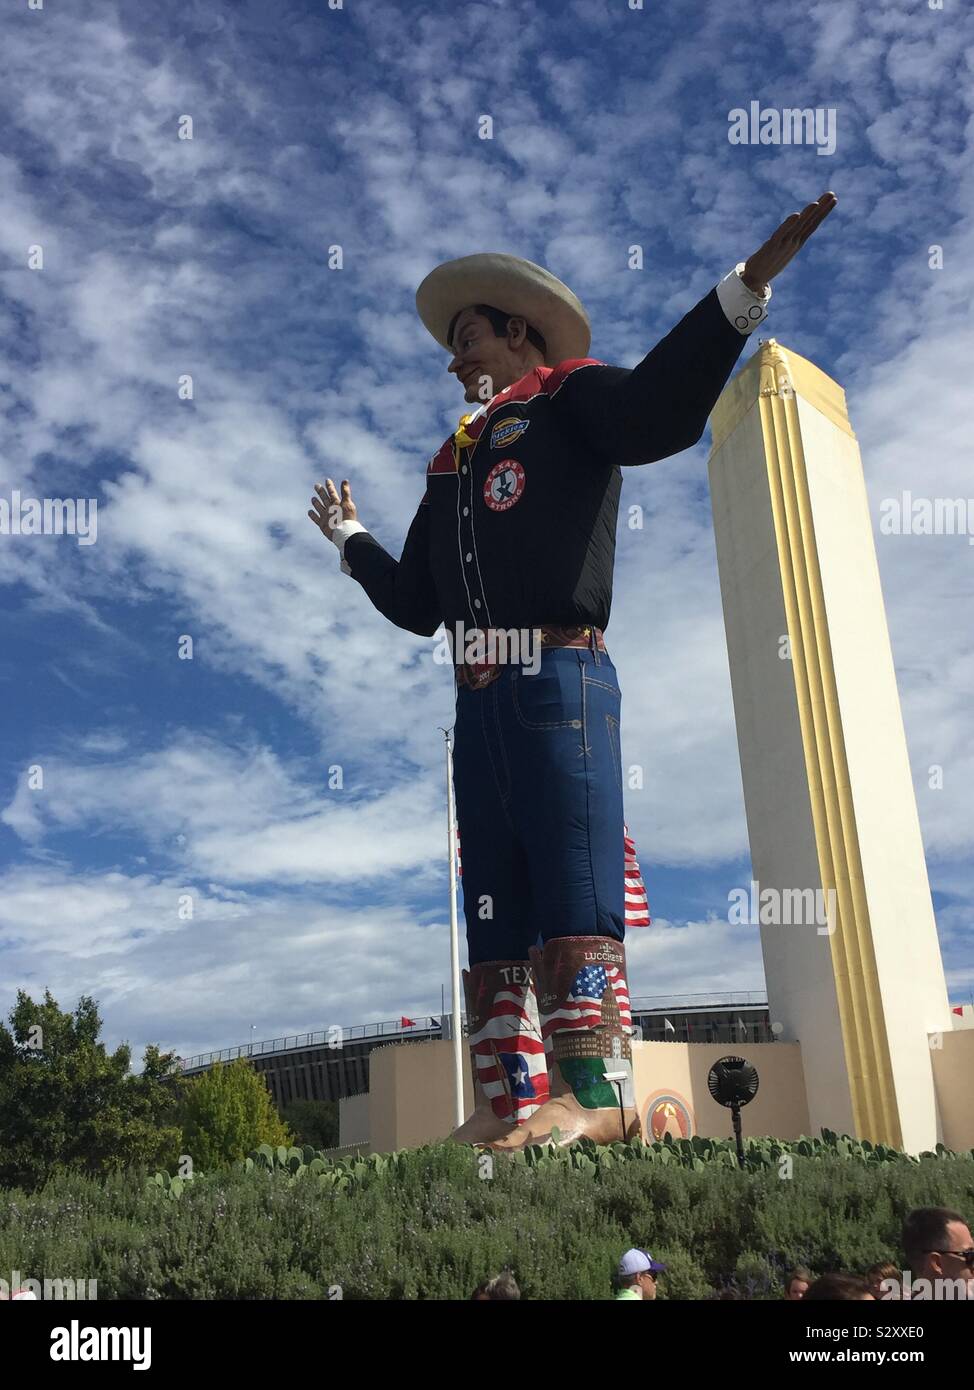 Big Tex stands tall at the Texas State Fair Stock Photo